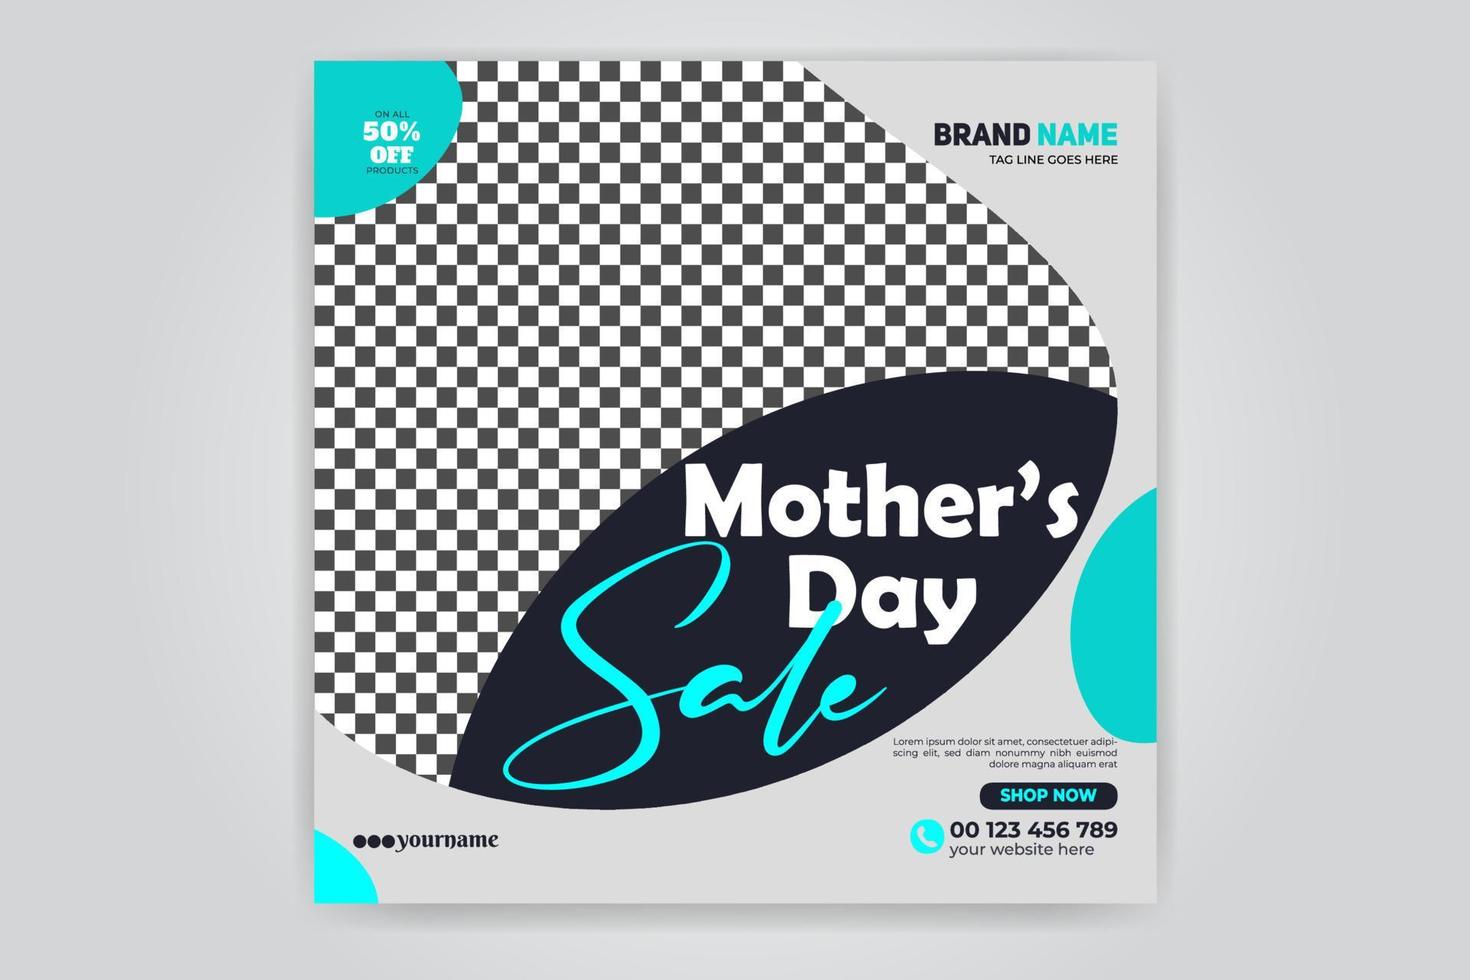 Mothers Day Fashion Sales Offer Discount Banner Social Media Post Design Template Free Download vector